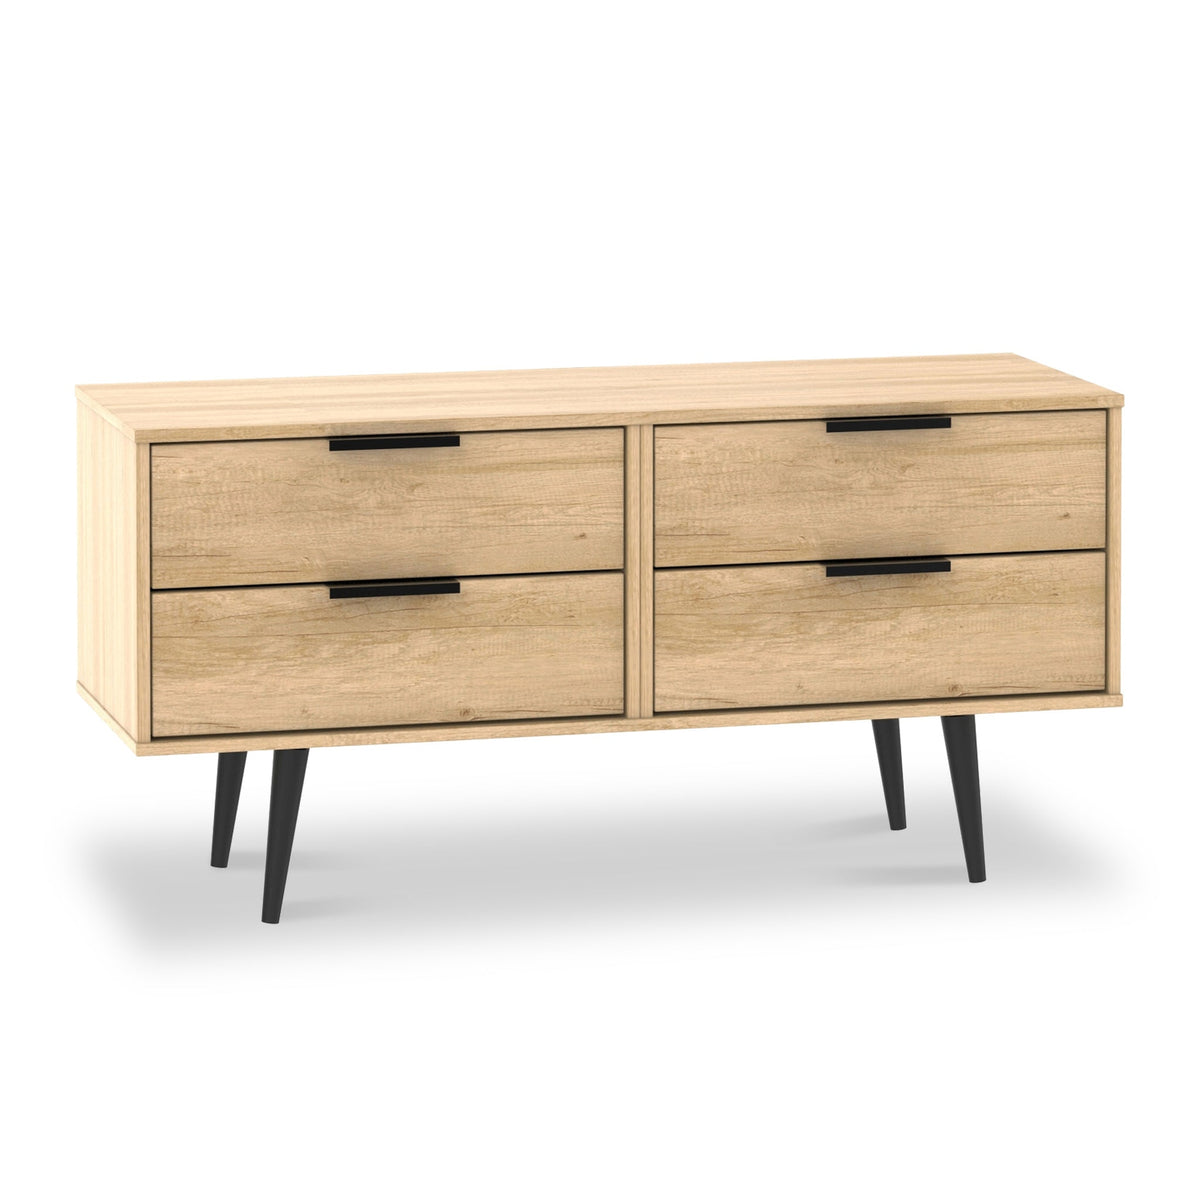 Asher Light Oak 4 Drawer Low Storage Chest with black legs from Roseland Furniture